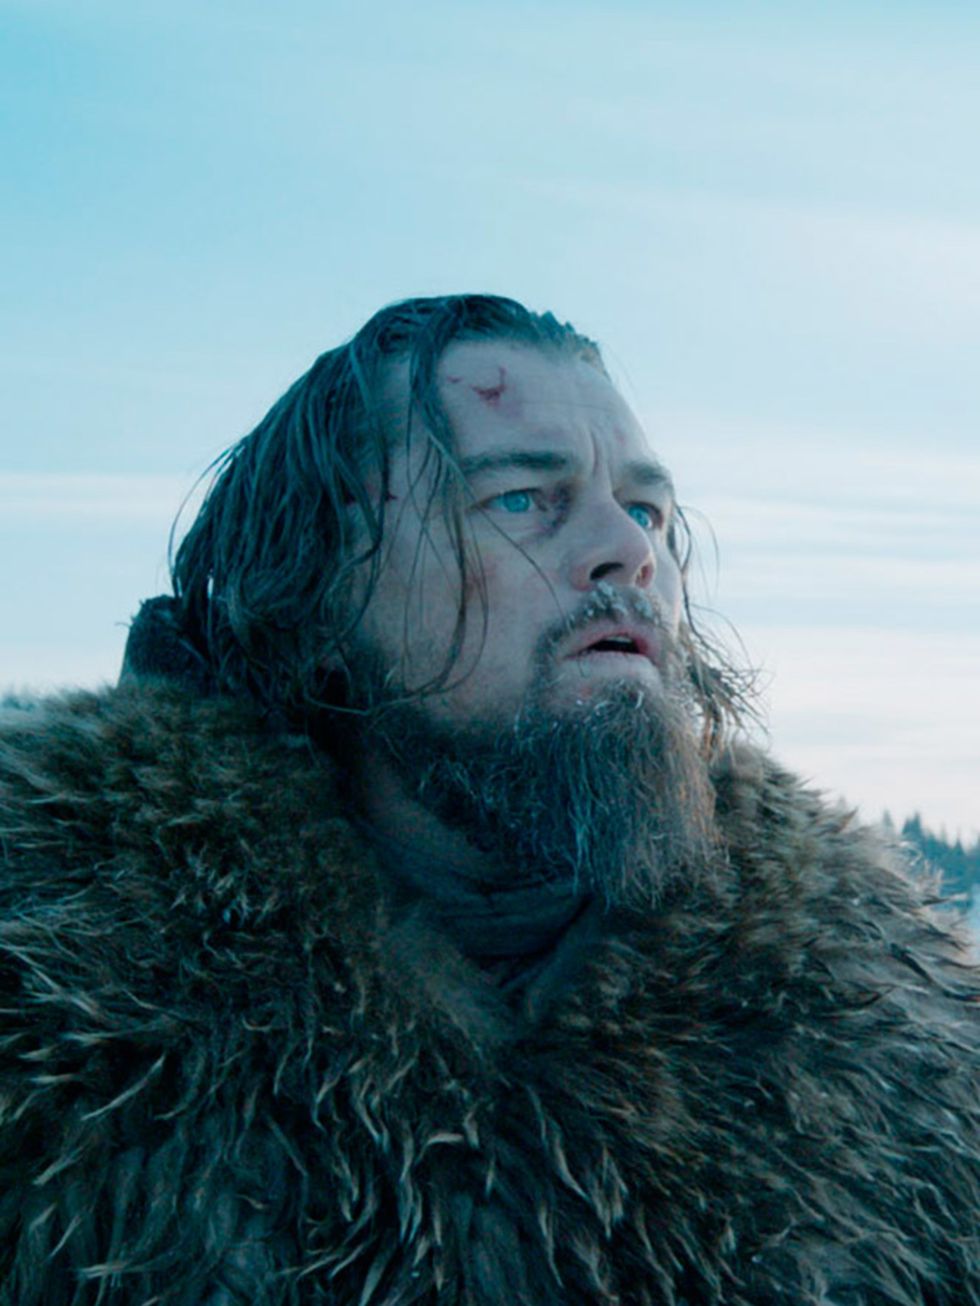 <p>FILM: The Revenant</p>

<p>Could this be the role that finally, FINALLY wins Leonardo DiCaprio his Oscar? Whatever happens, his searing turn as a frontiersman fighting for survival in a frozen wilderness is going to get him pretty darned close. He play